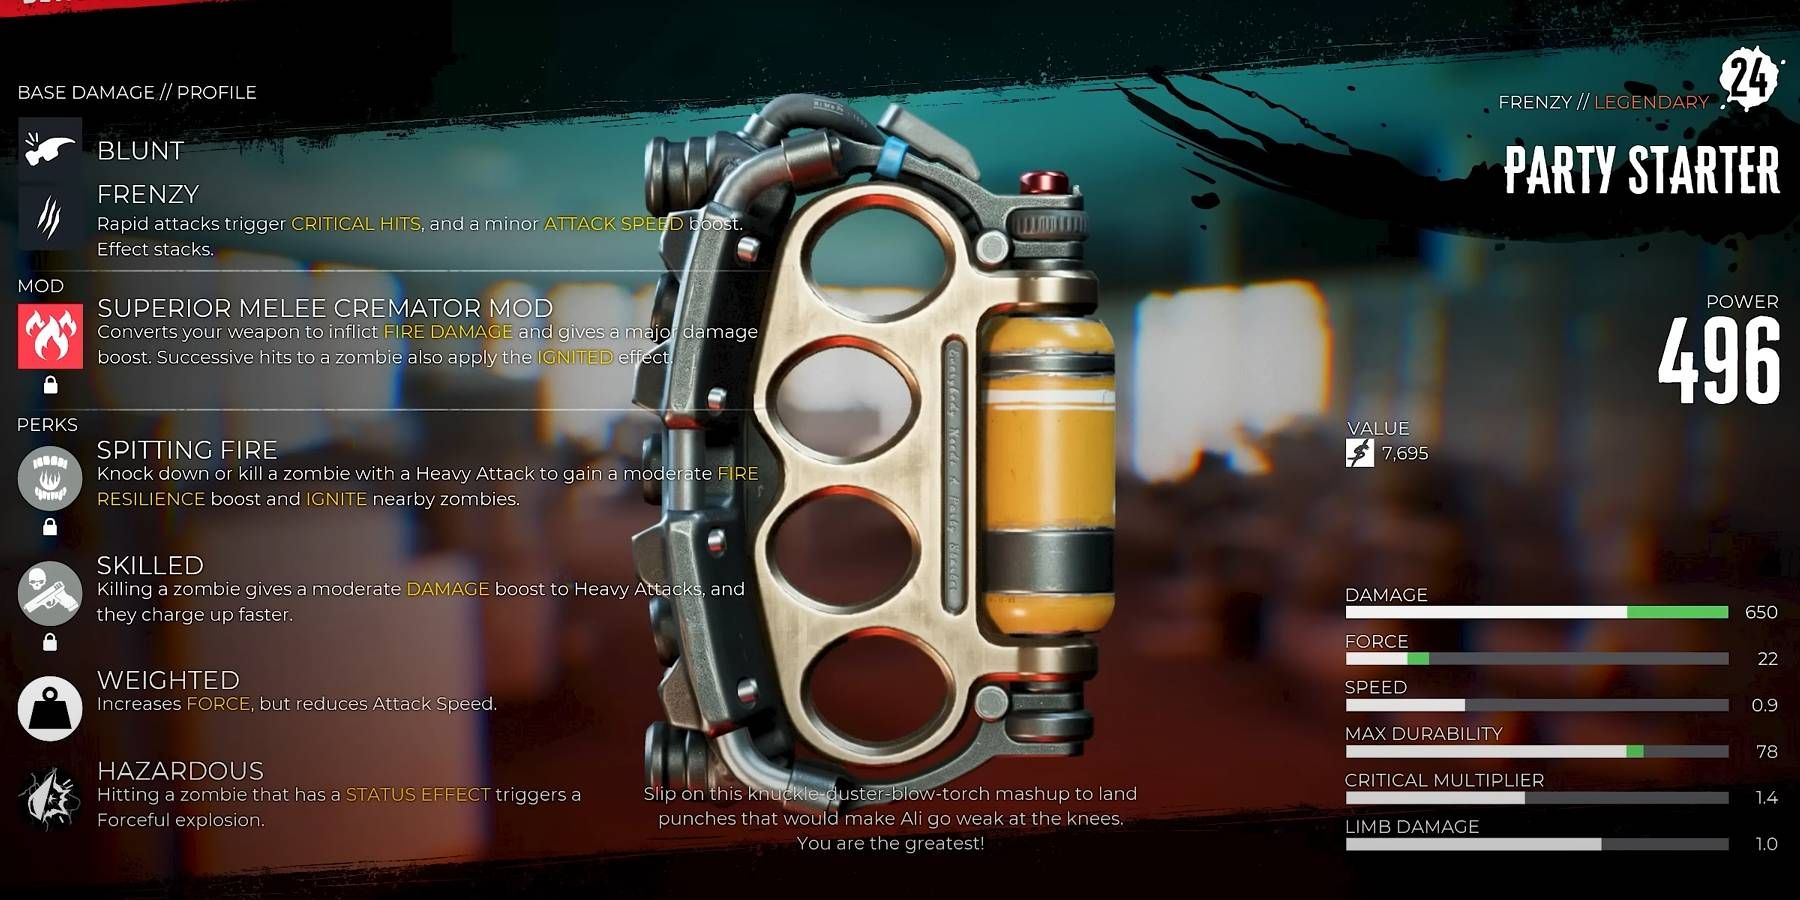 Dead Island 2 Party Starter Legendary Weapon Found Through Side Quest in Hell-A